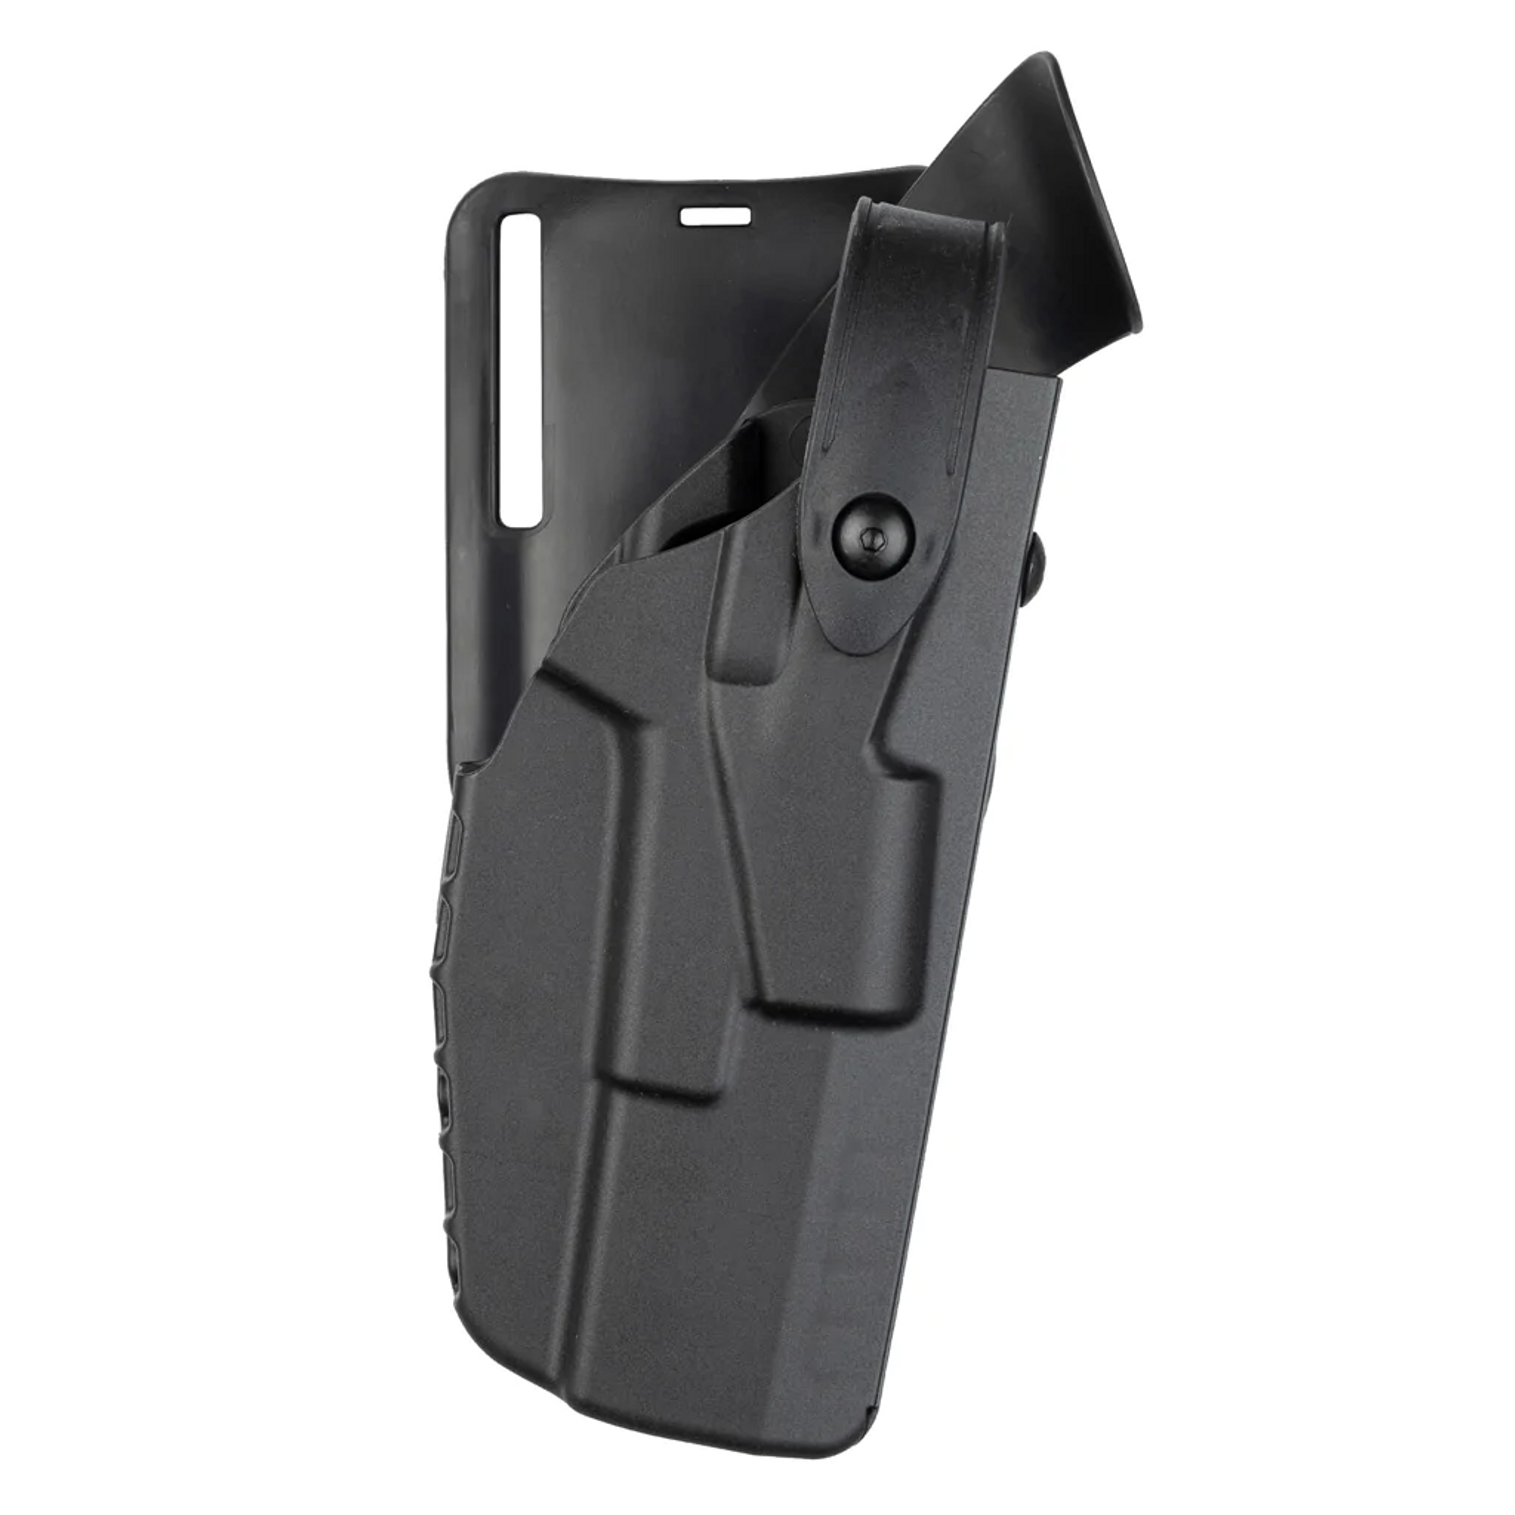 Model 7365 7ts Als/sls Low-ride, Level Iii Retention Duty Holster For Sig Sauer P229 40